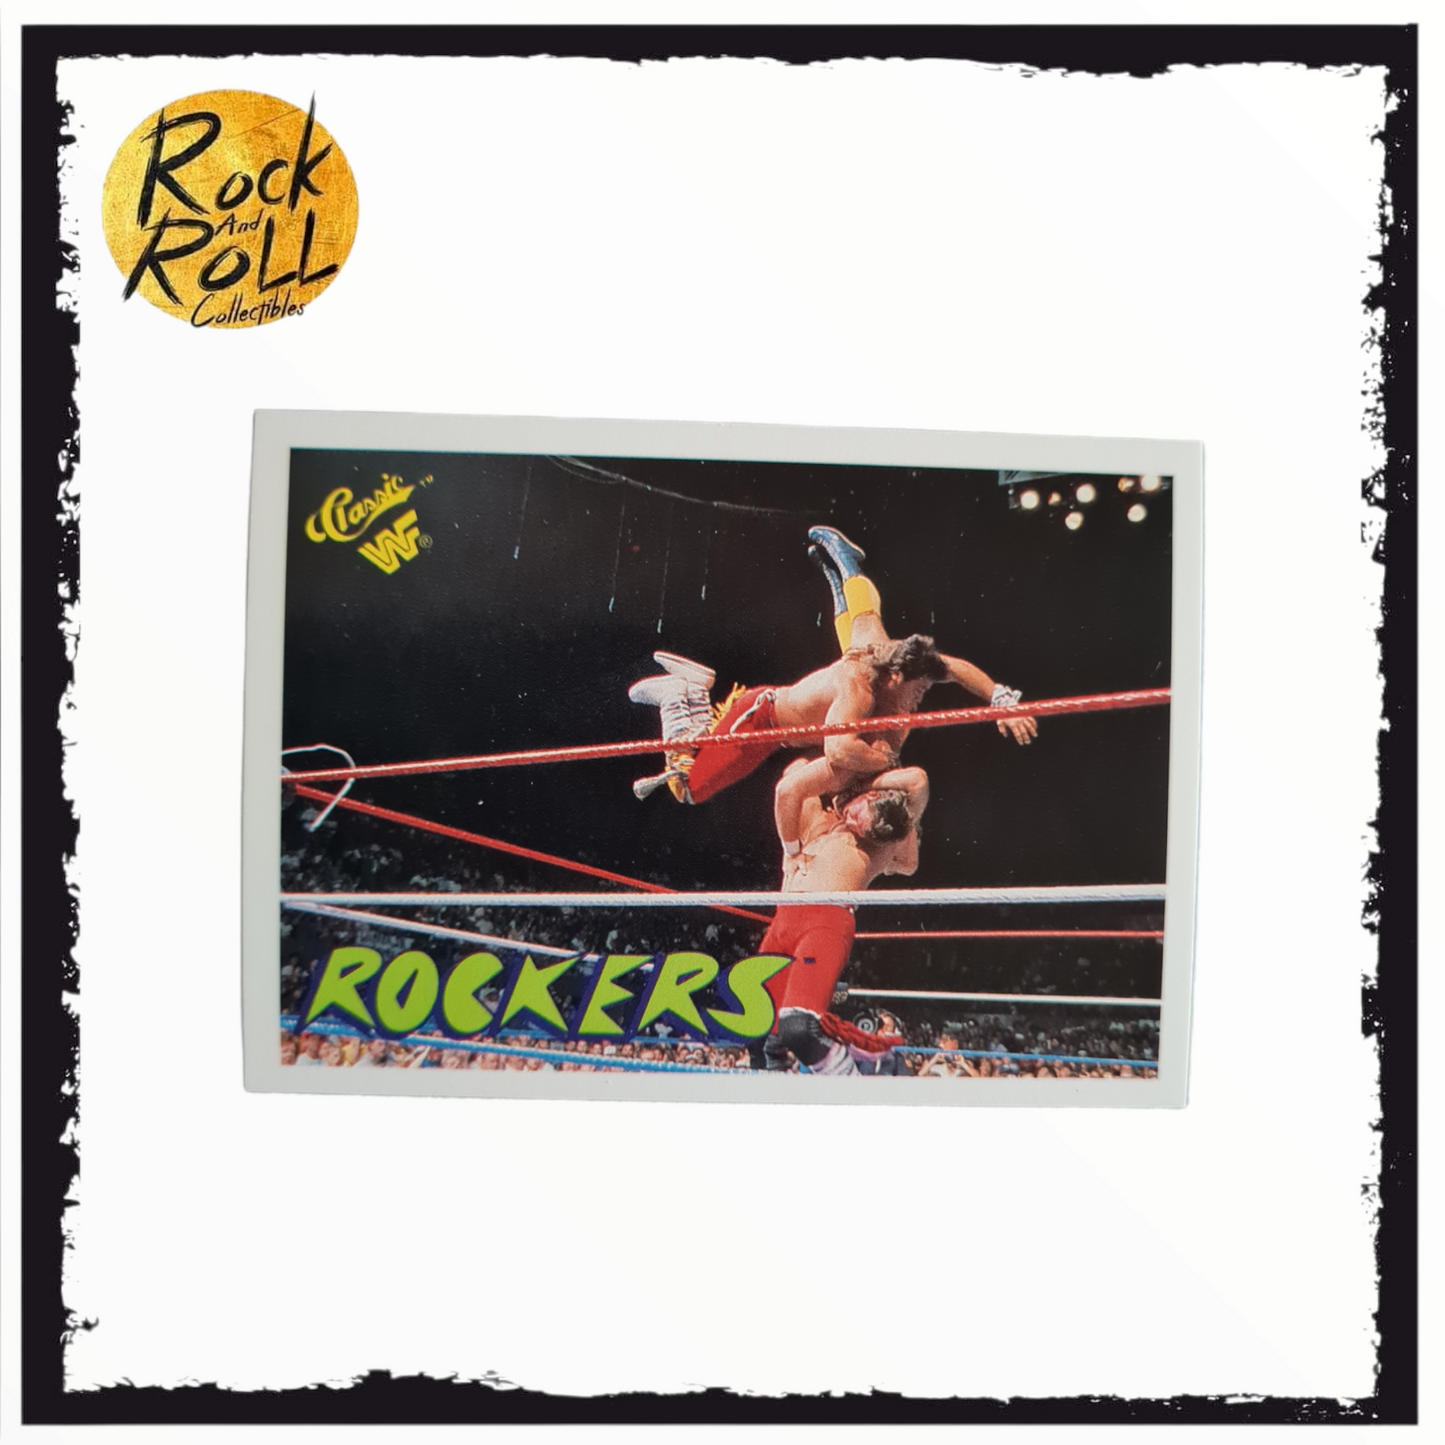 WWF 1990 Classic Trading Card - The Rockers - Shawn Michaels & Marty Jannetty #81